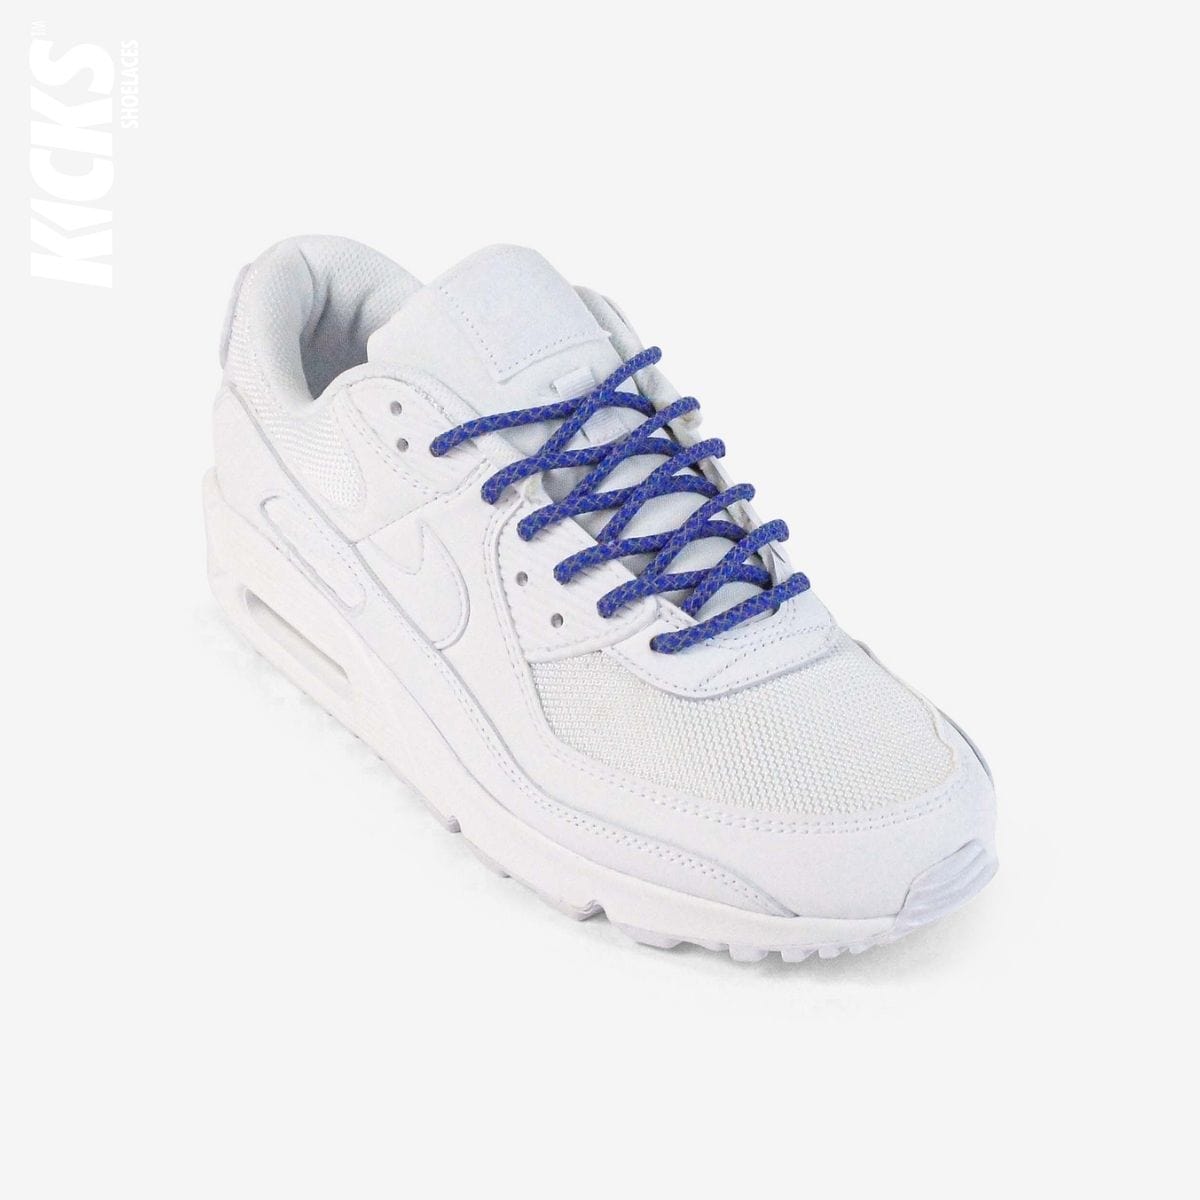 rope-laces-on-white-sneakers-with-kids-royal-blue-shoelaces